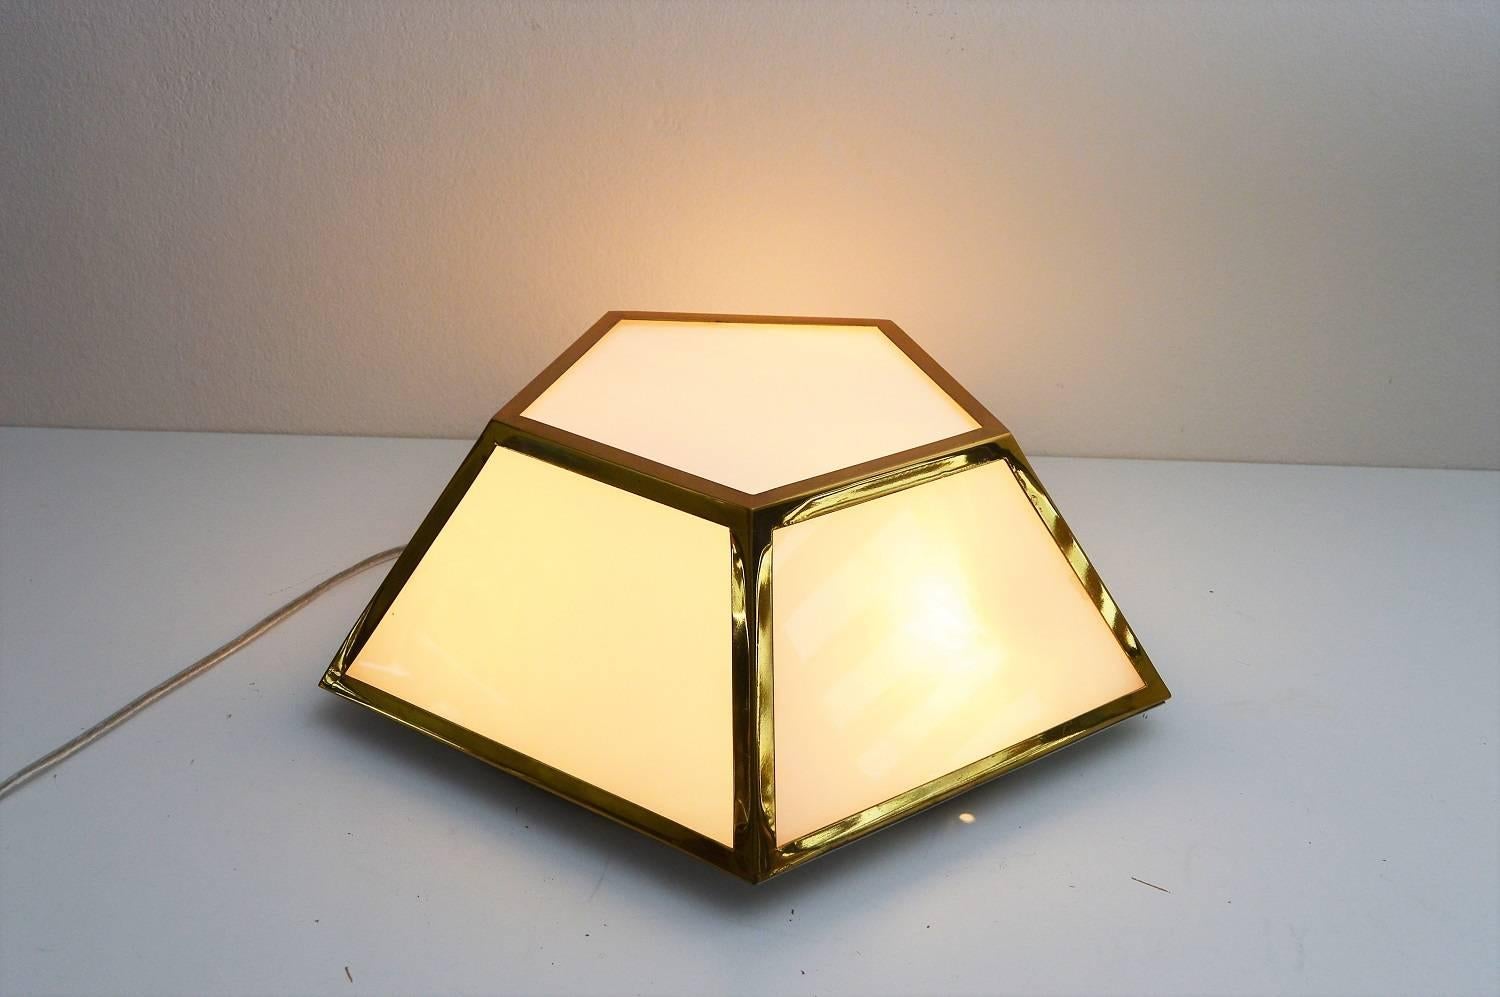 Beautiful elegant Art Deco Pentagon flush mount lighting or ceiling lamp, which could be used also as wall light.
Made of shiny brass frame with opaline white glasses.
Equipped for three small candelabra light bulbs.
Manufacturing attributed to